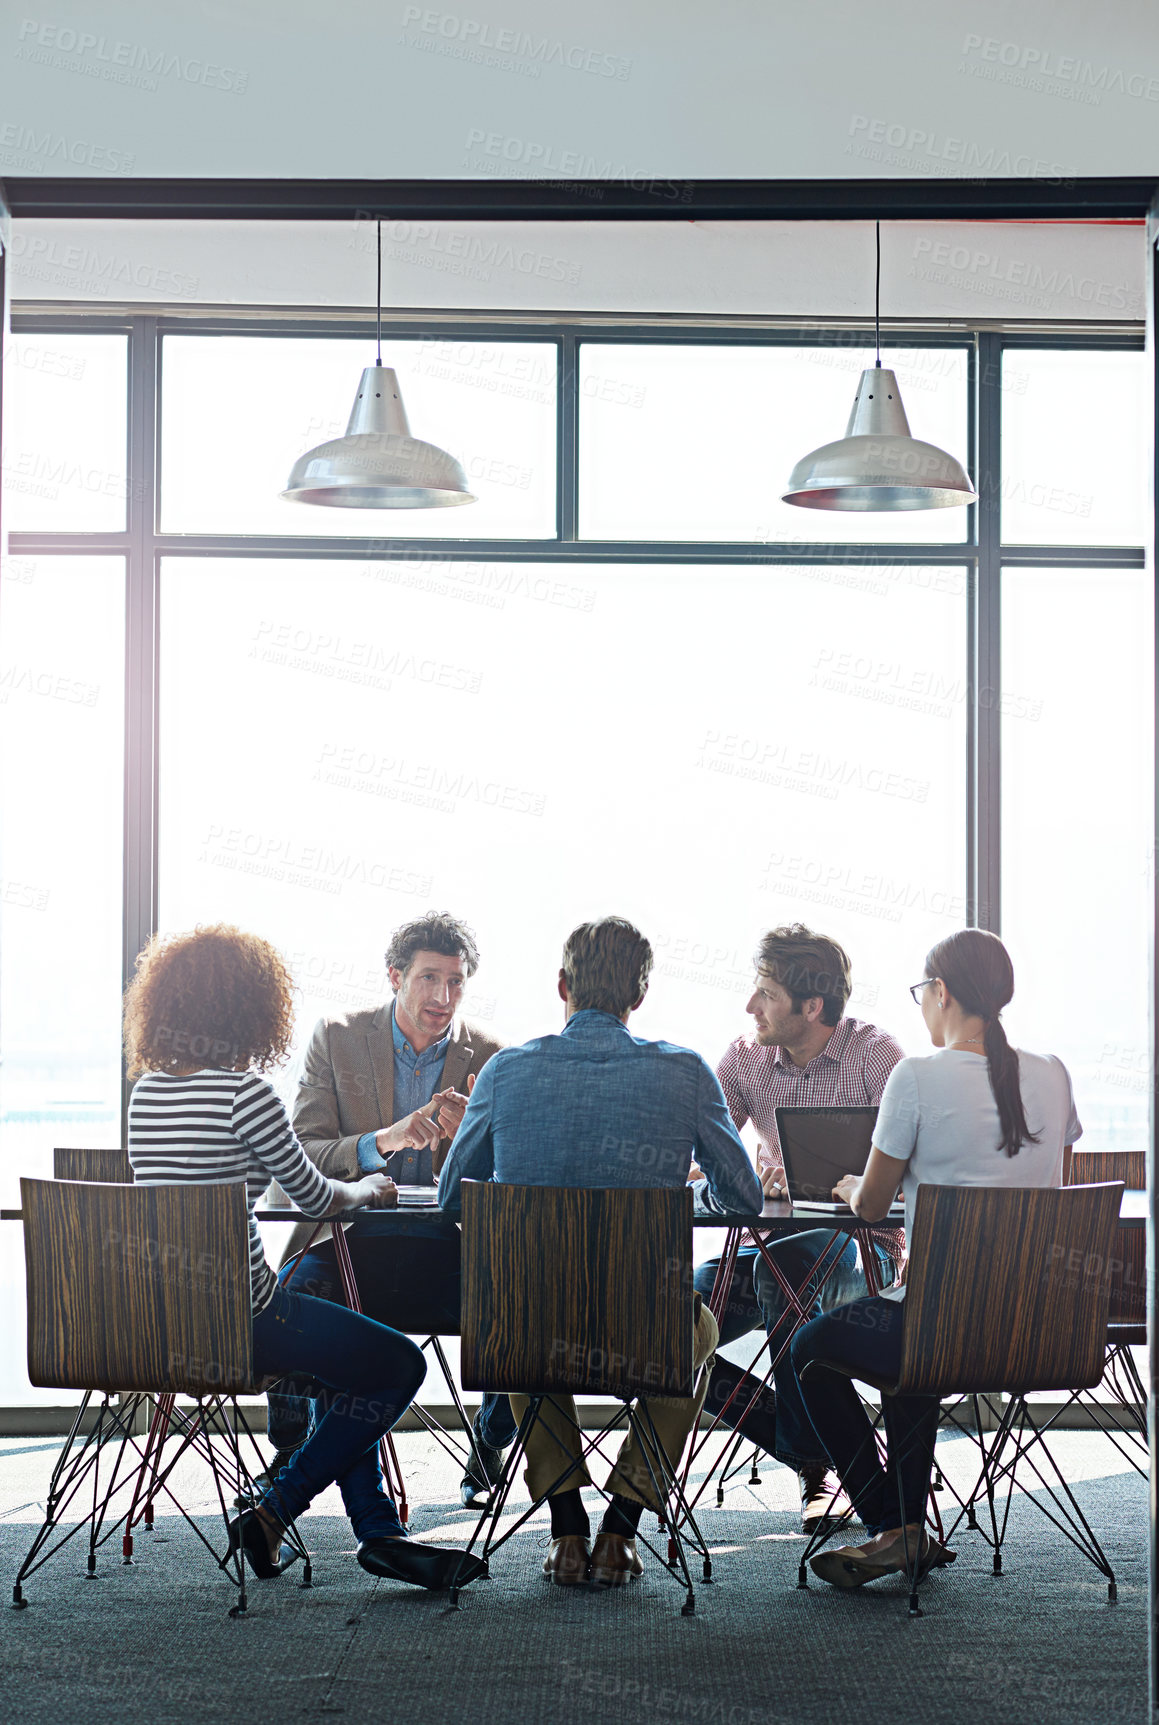 Buy stock photo Shot of a group of coworkers having a brainstorming session in an office boardroom